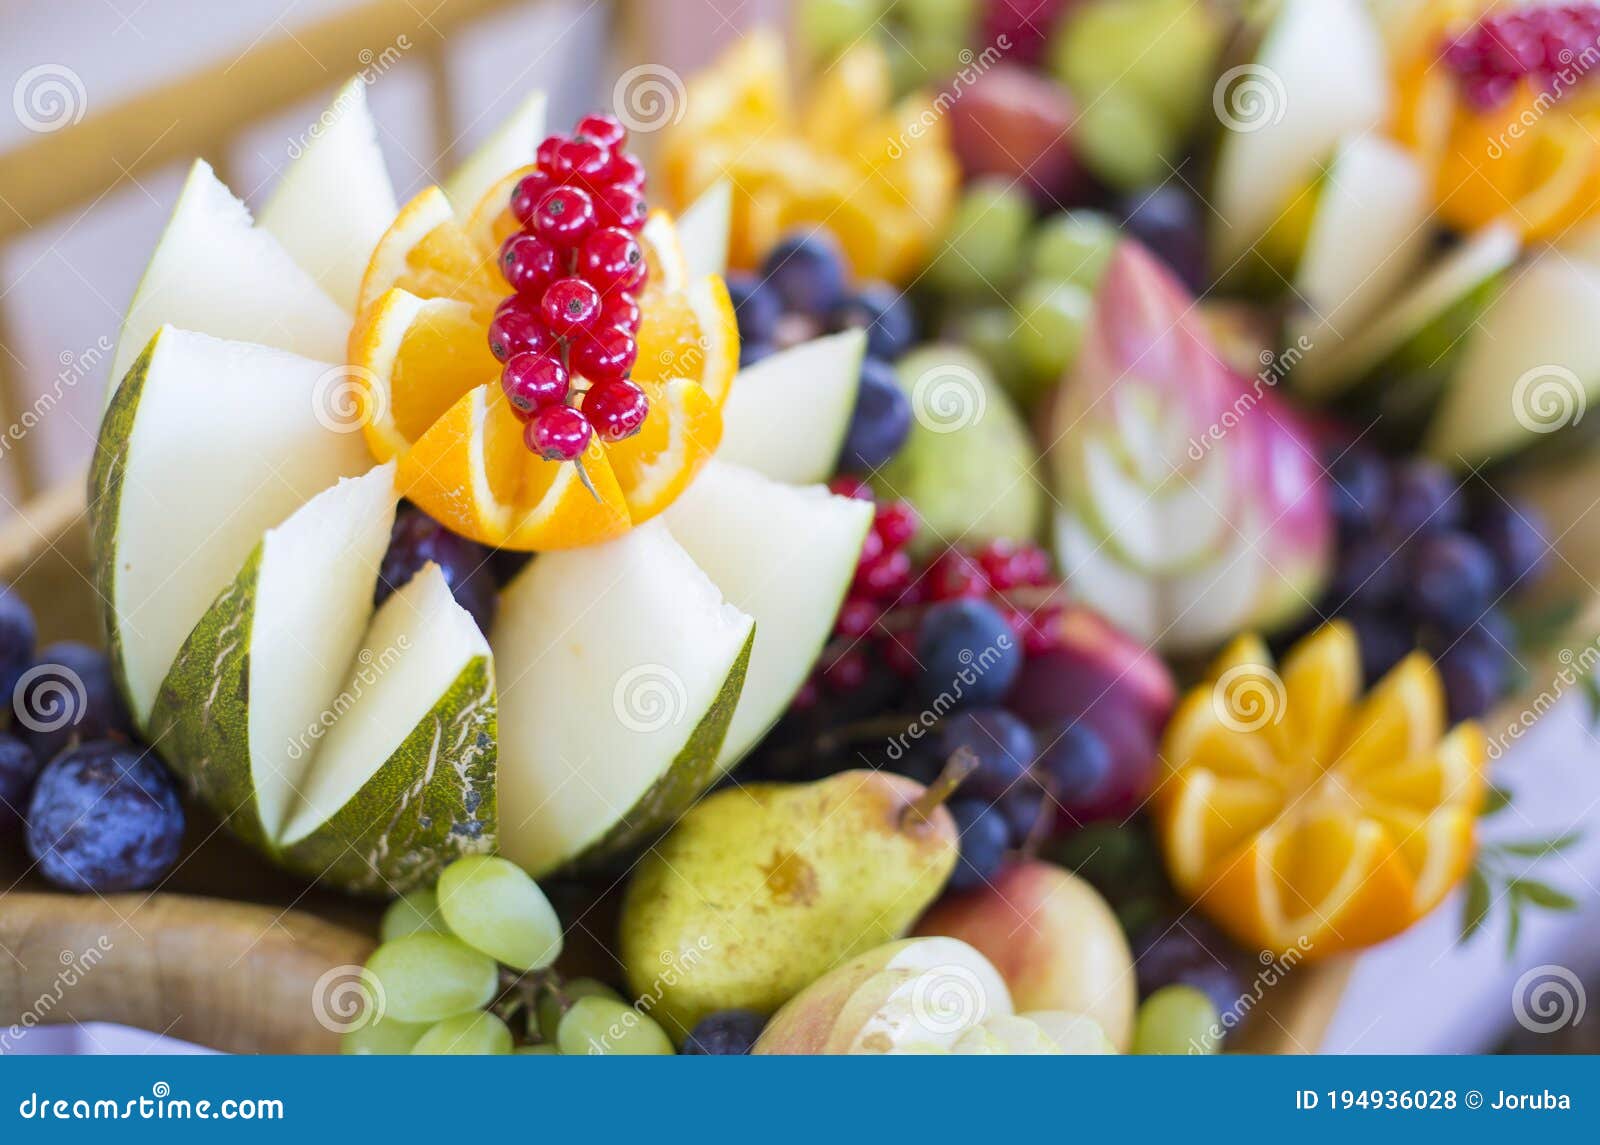 colorful and varios heap of fruits